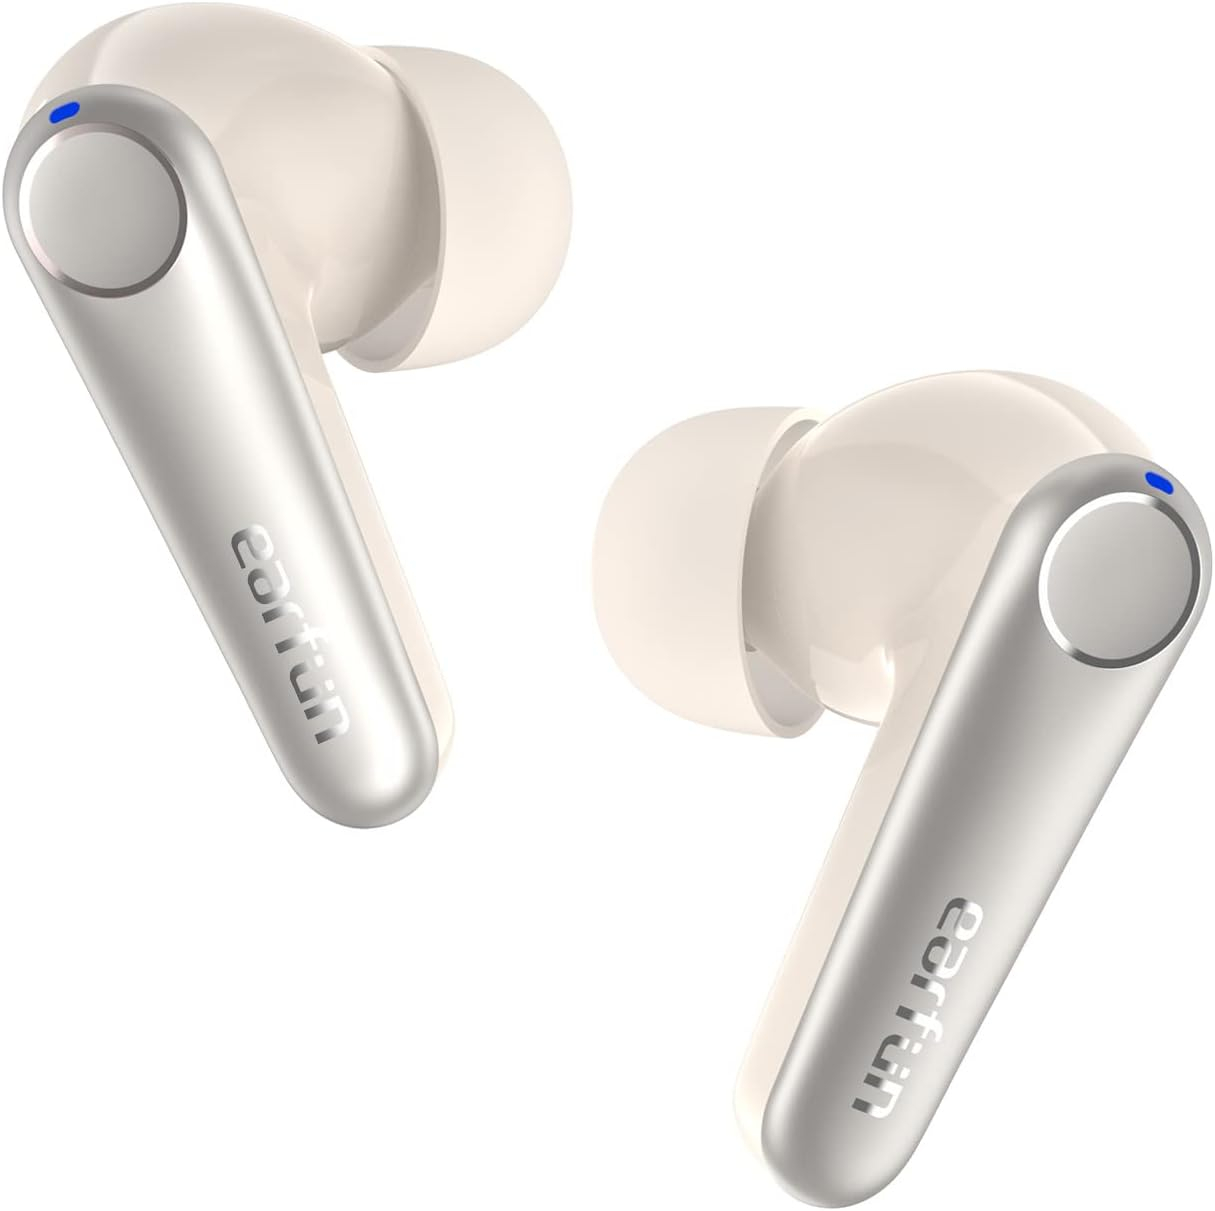 EarFun Air Pro 3 Noise Cancelling Wireless Earbuds, Qualcomm® aptX™ Adaptive Sound, 6 Mics CVC 8.0 ENC, Bluetooth 5.3 Earbuds, Multipoint Connection, 45H Playtime, App Customize EQ, Oat White